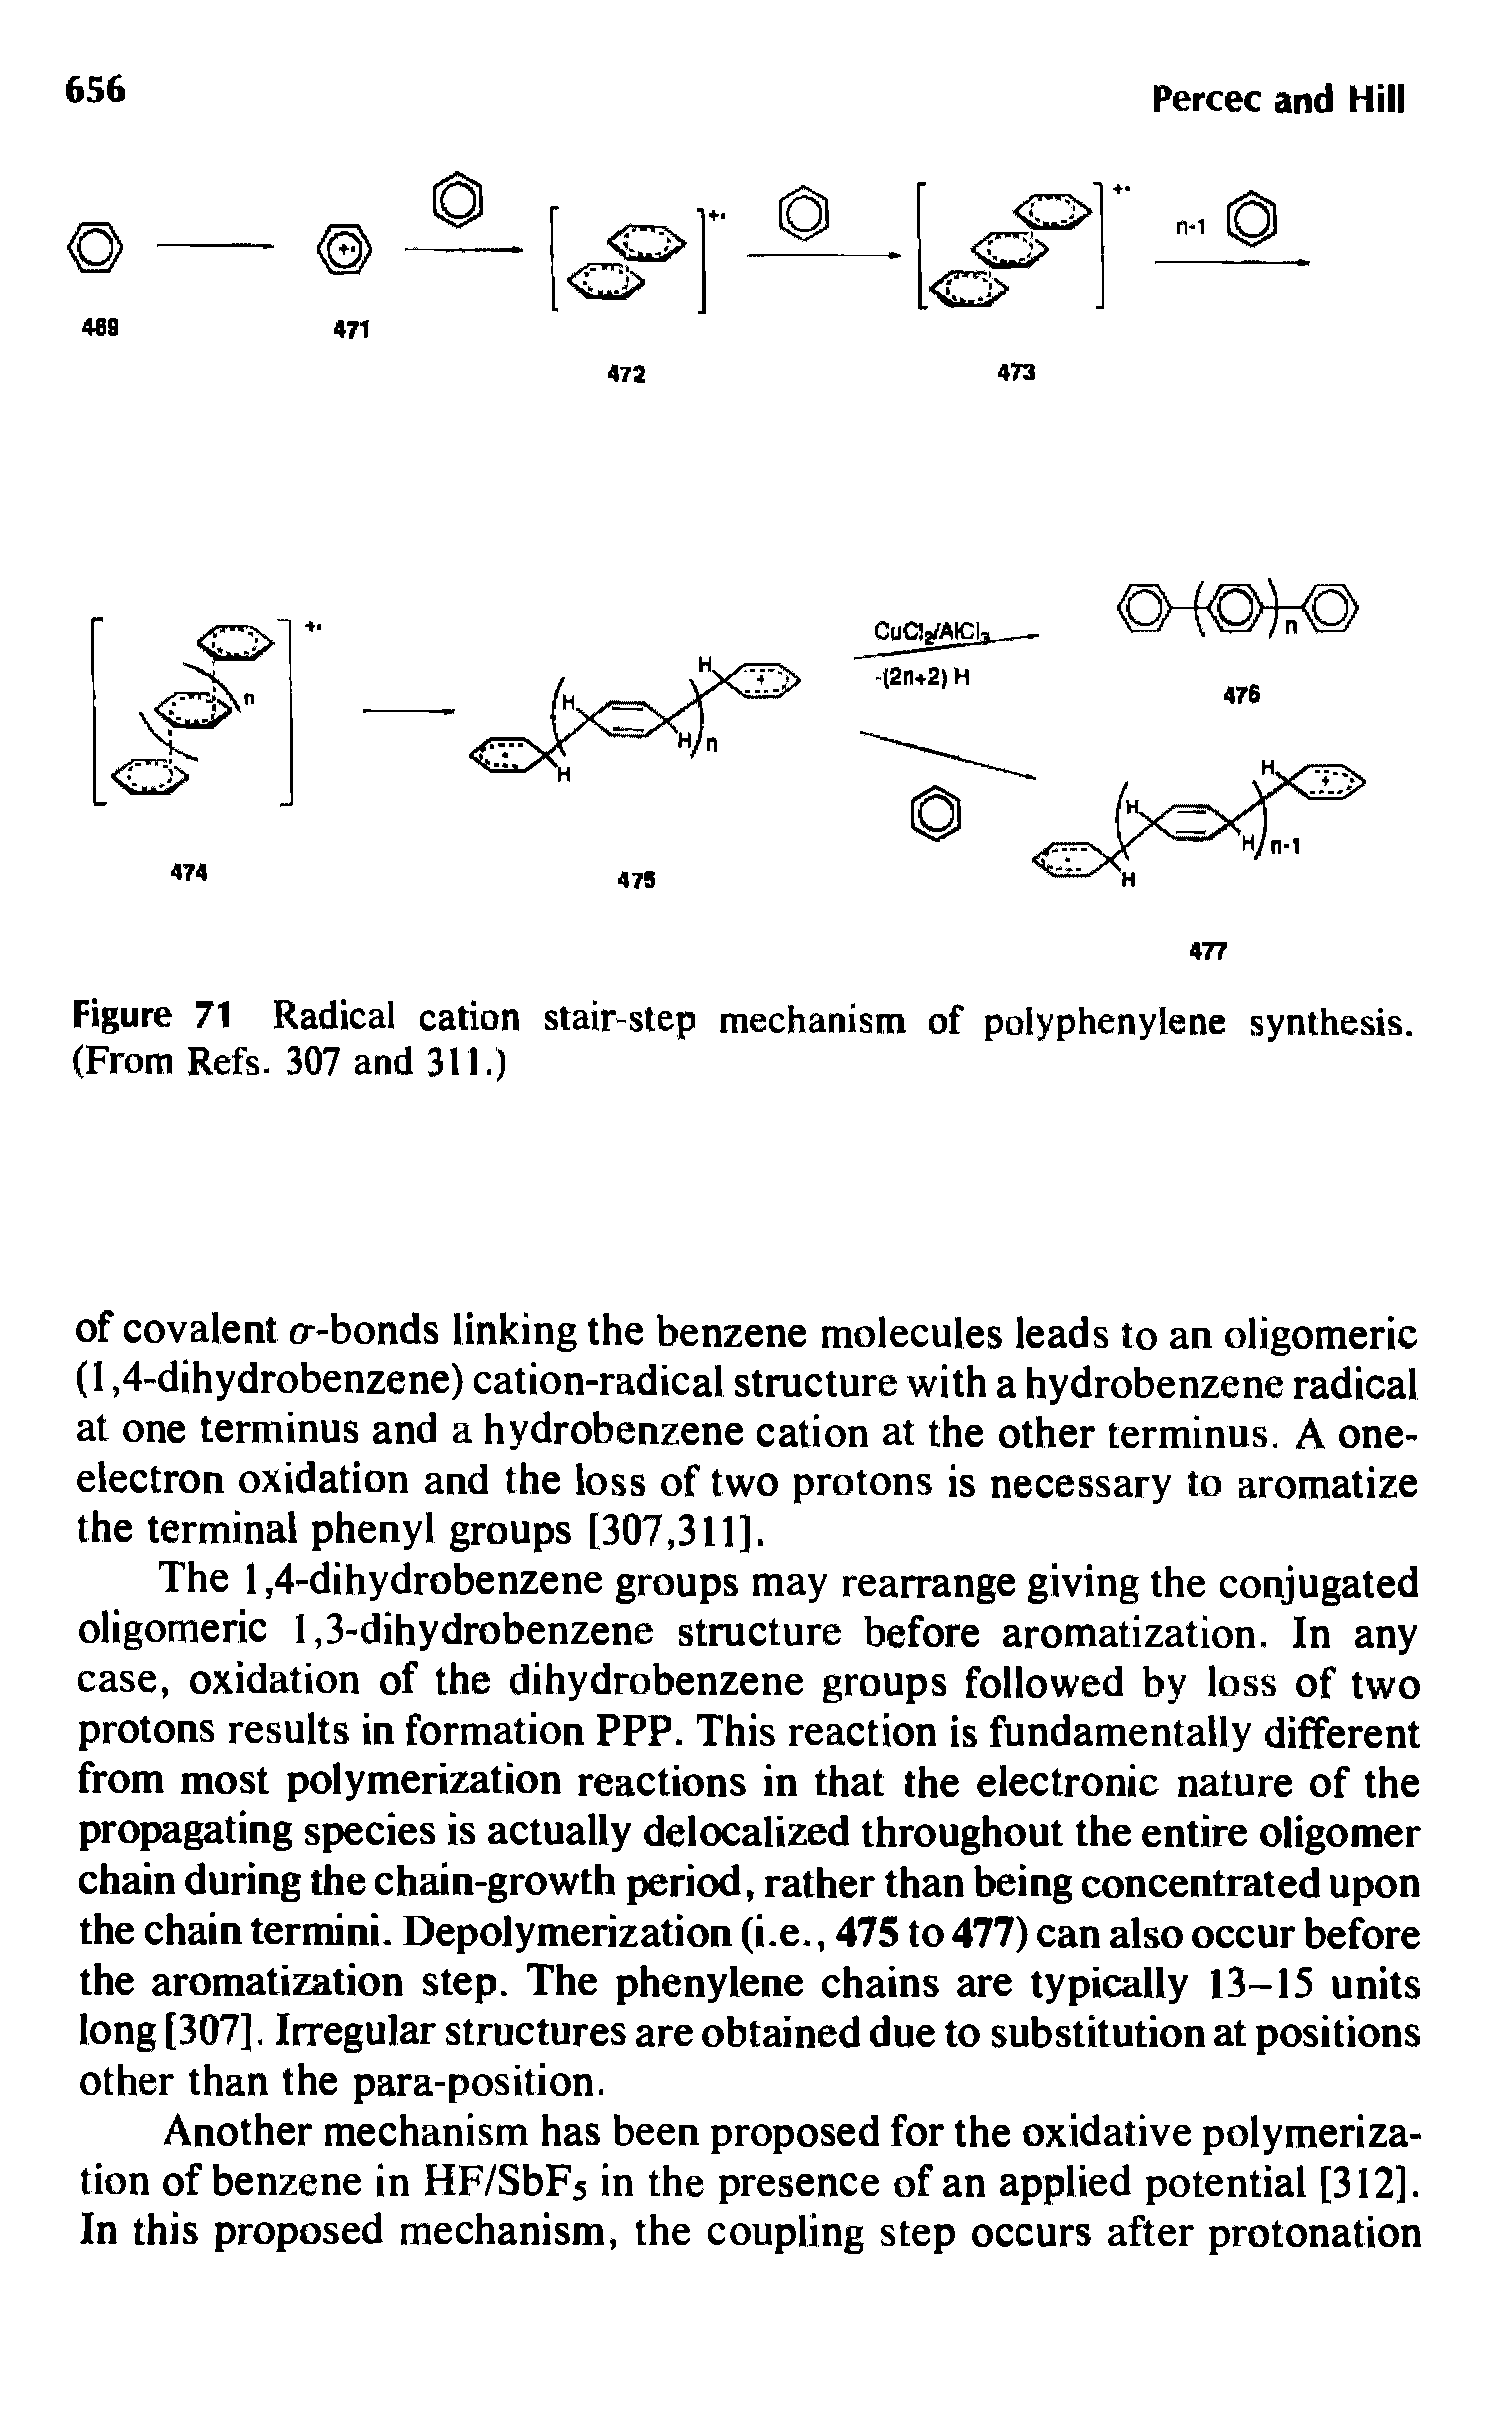 Figure 71 Radical cation stair step mechanism of polyphenylene synthesis. (From Refs. 307 and 311.)...